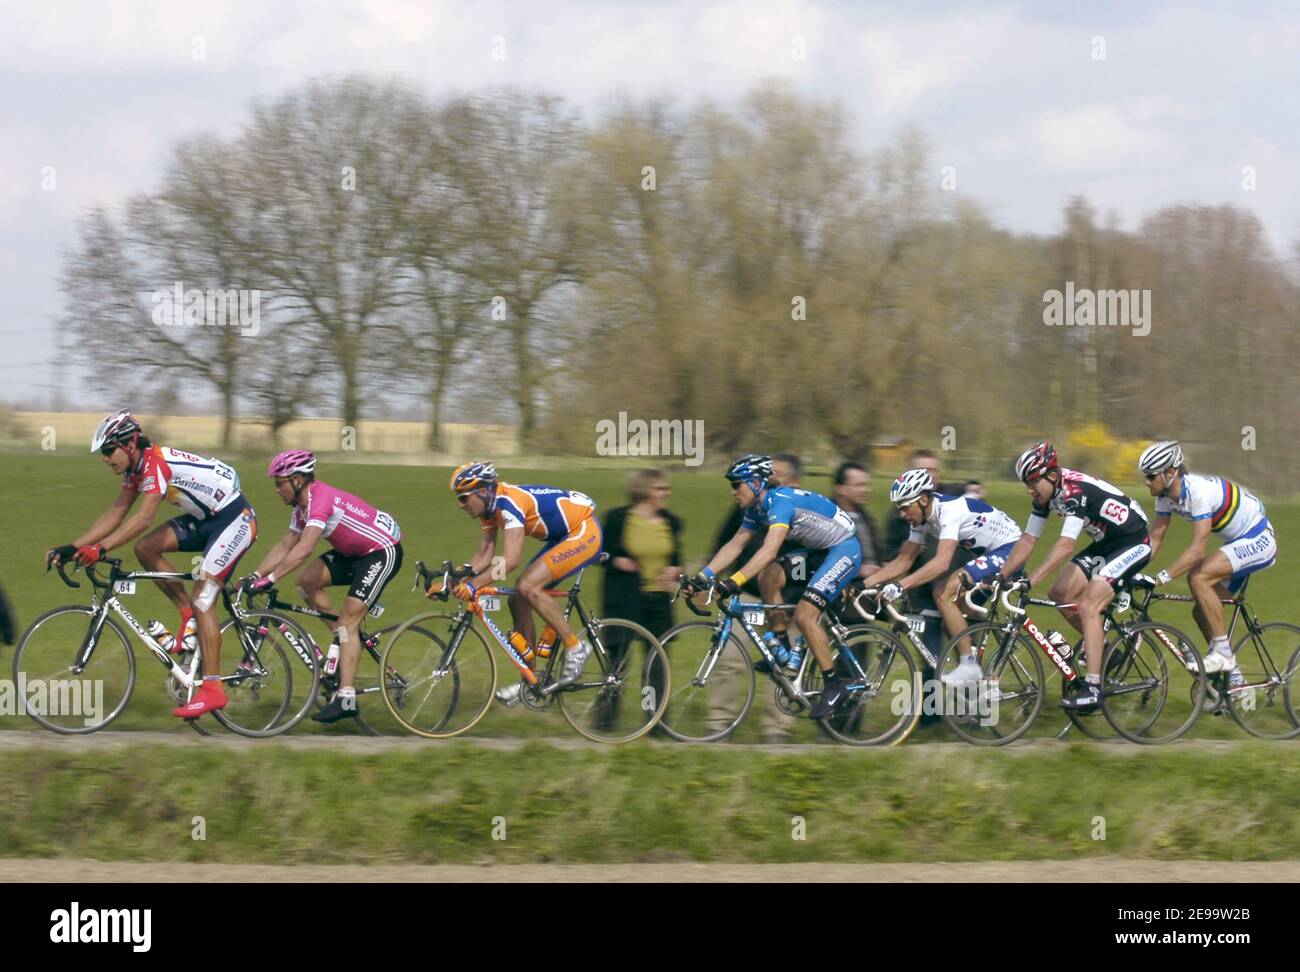 The pack rides with Belgium's world champion Tom Boonen during the 104th Paris-Roubaix cycling classic race between Compiegne and Roubaix on April 9, 2006. Photo by Nicolas Gouhier/Cameleon/ABACAPRESS.COM Stock Photo